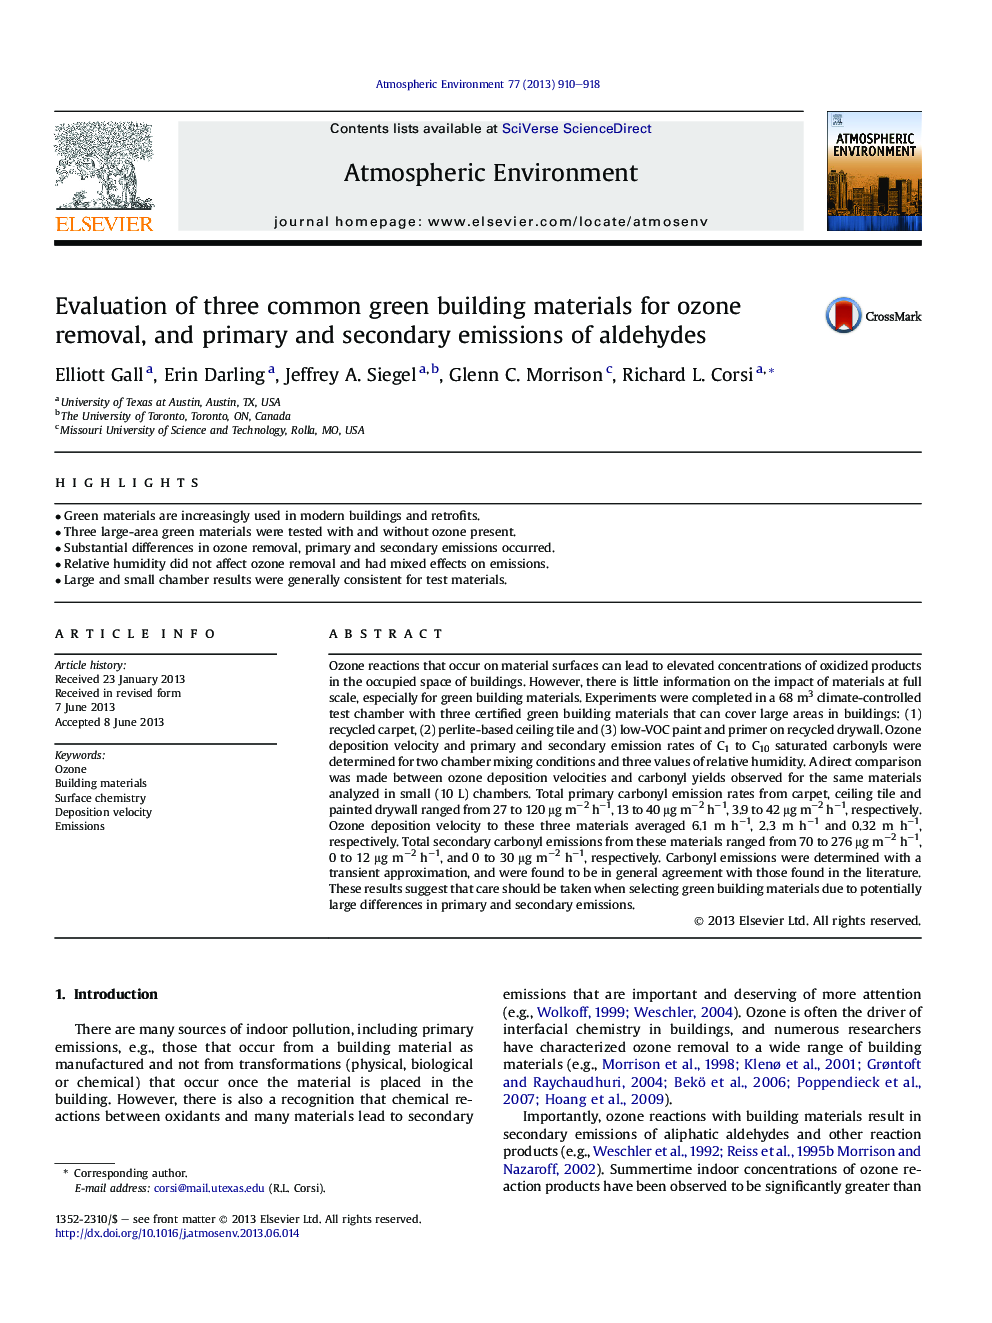 Evaluation of three common green building materials for ozone removal, and primary and secondary emissions of aldehydes